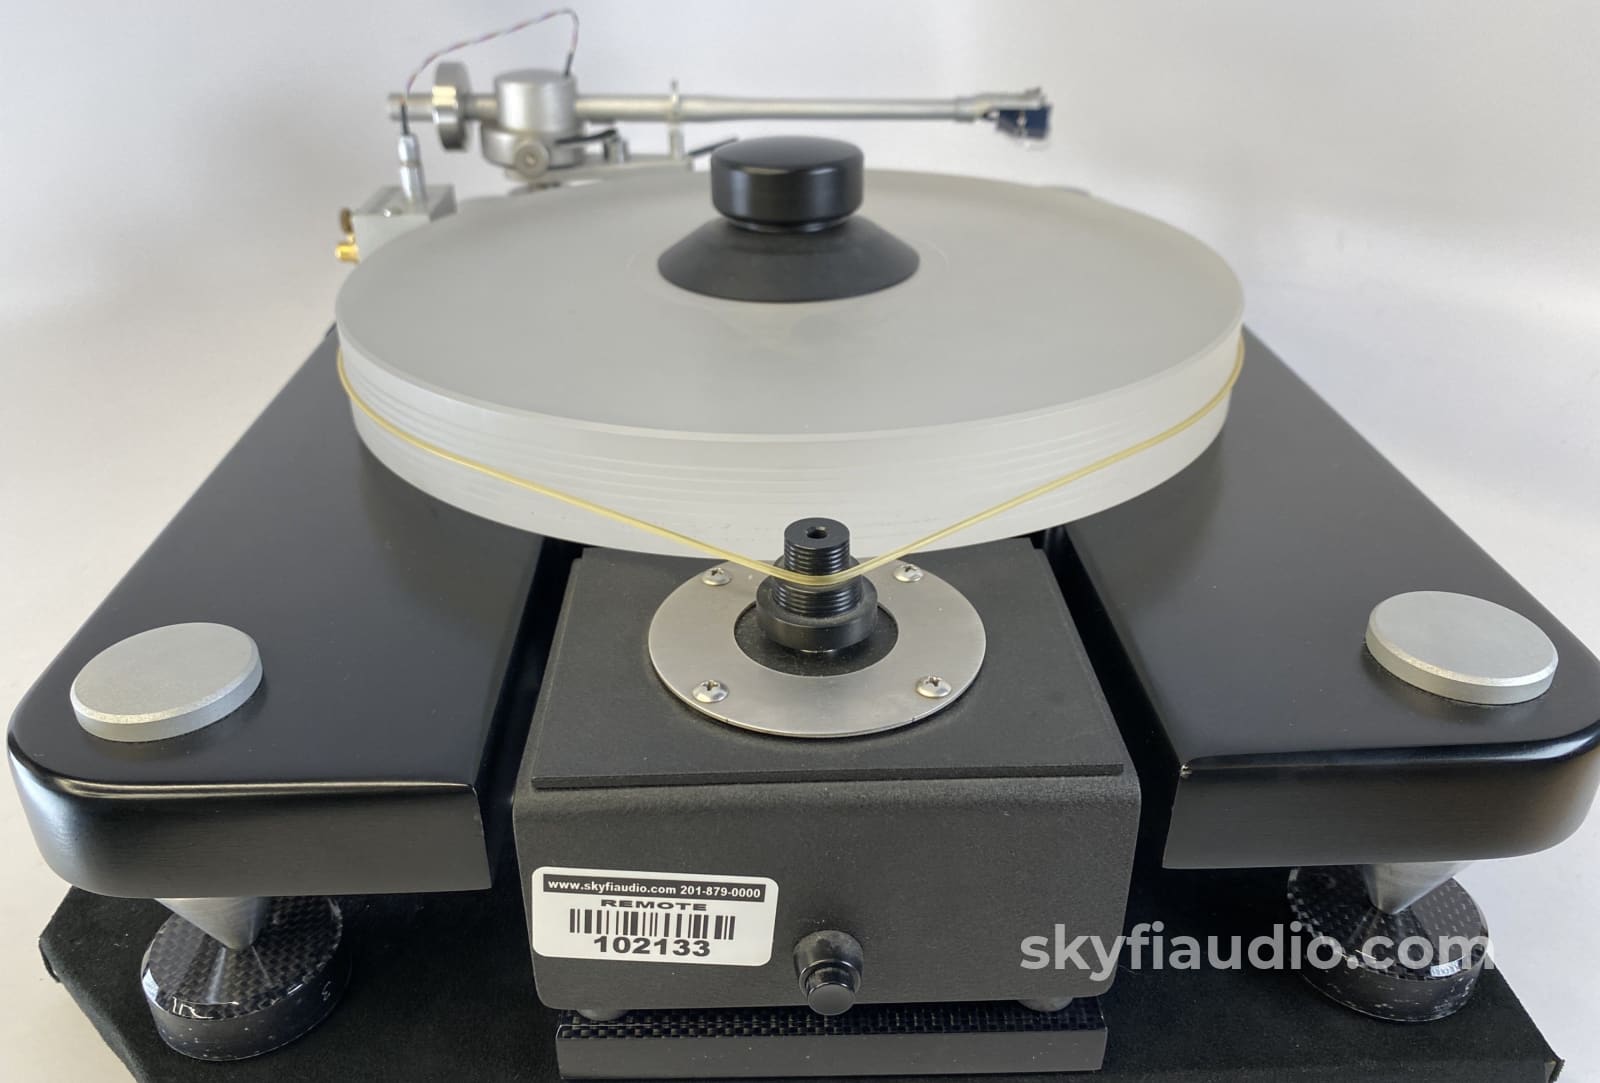 Vpi Aries Scout With New Sumiko Moving-Coil Phono Cartridge Turntable